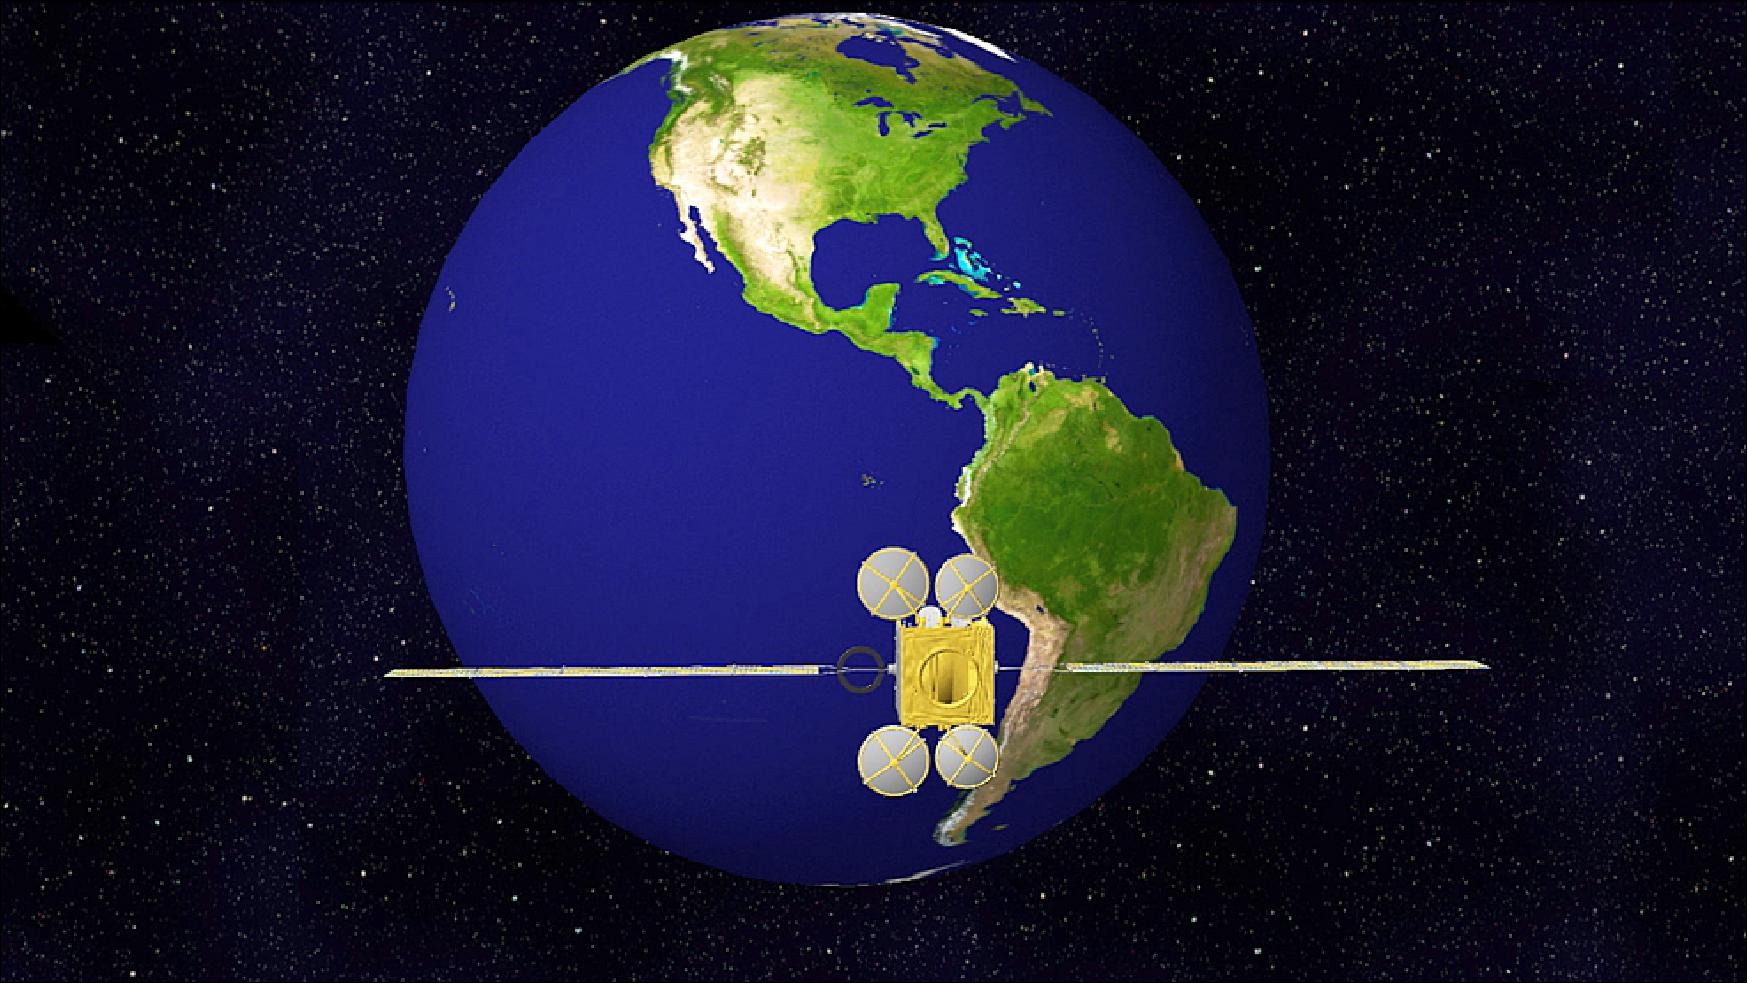 Figure 9: Once in orbit, TEMPO will be the first space-based instrument to monitor major air pollutants across the North American continent hourly during daytime (image credit: SAO)